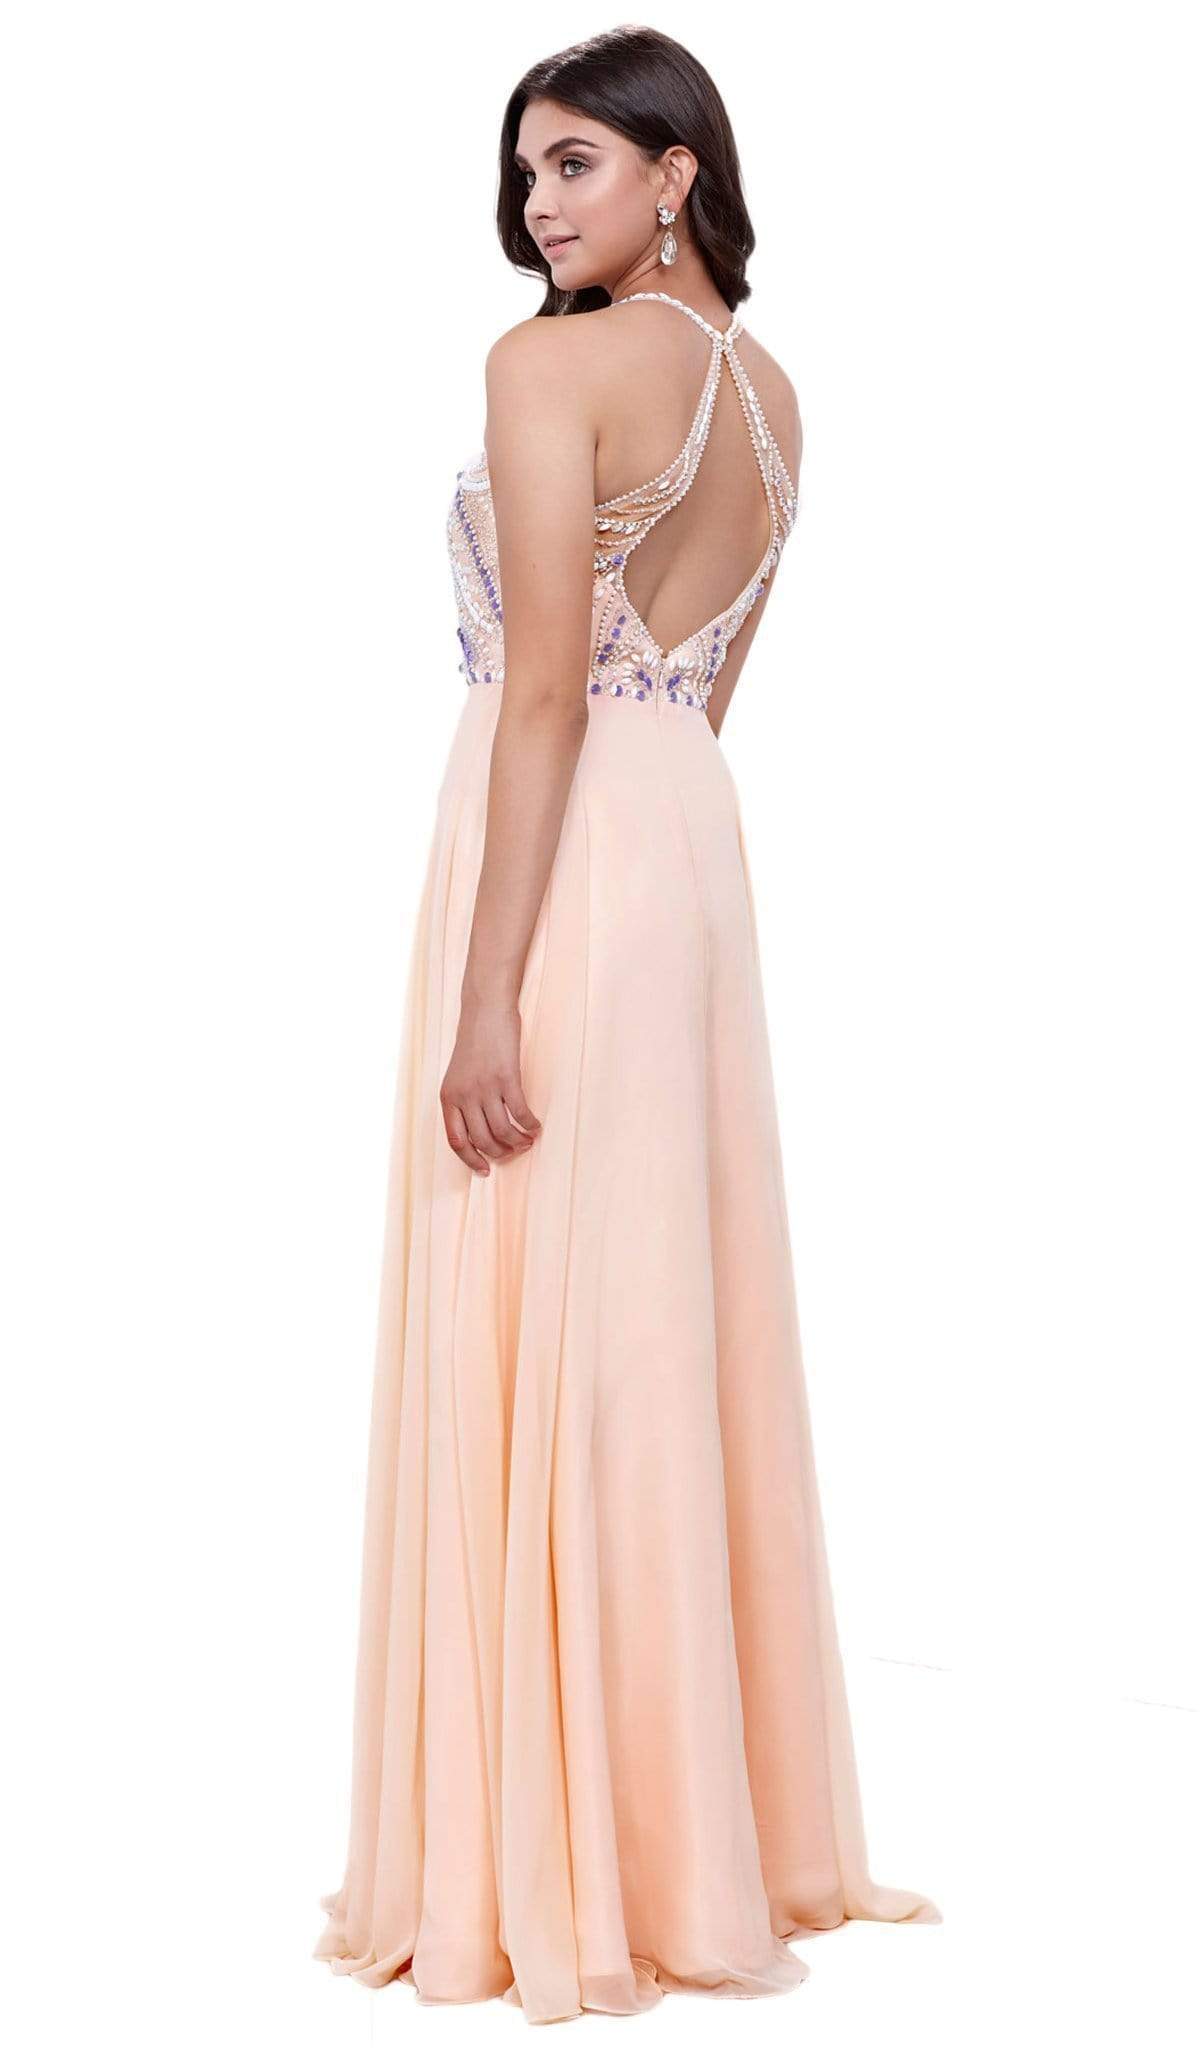 Nox Anabel - 8276 Sleeveless Bejeweled Halter A-line Dress Special Occasion Dress